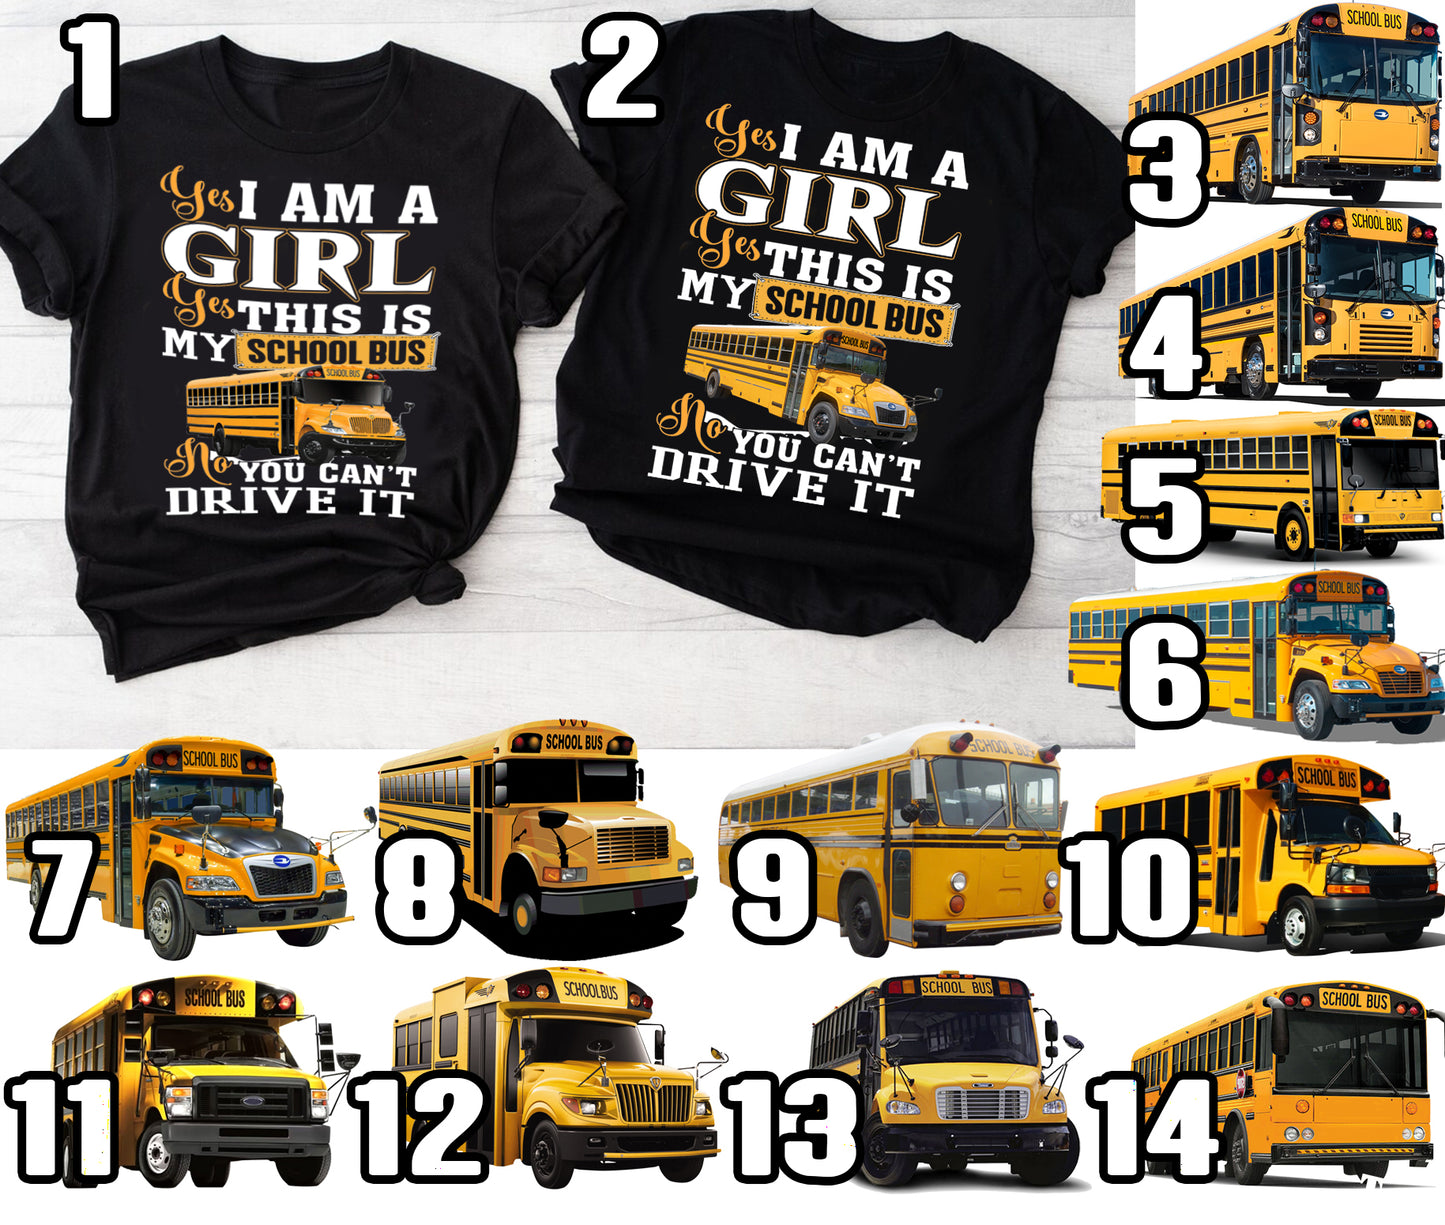 Yes, I am a Girl - Yes, This is my school bus - No, You can't drive it